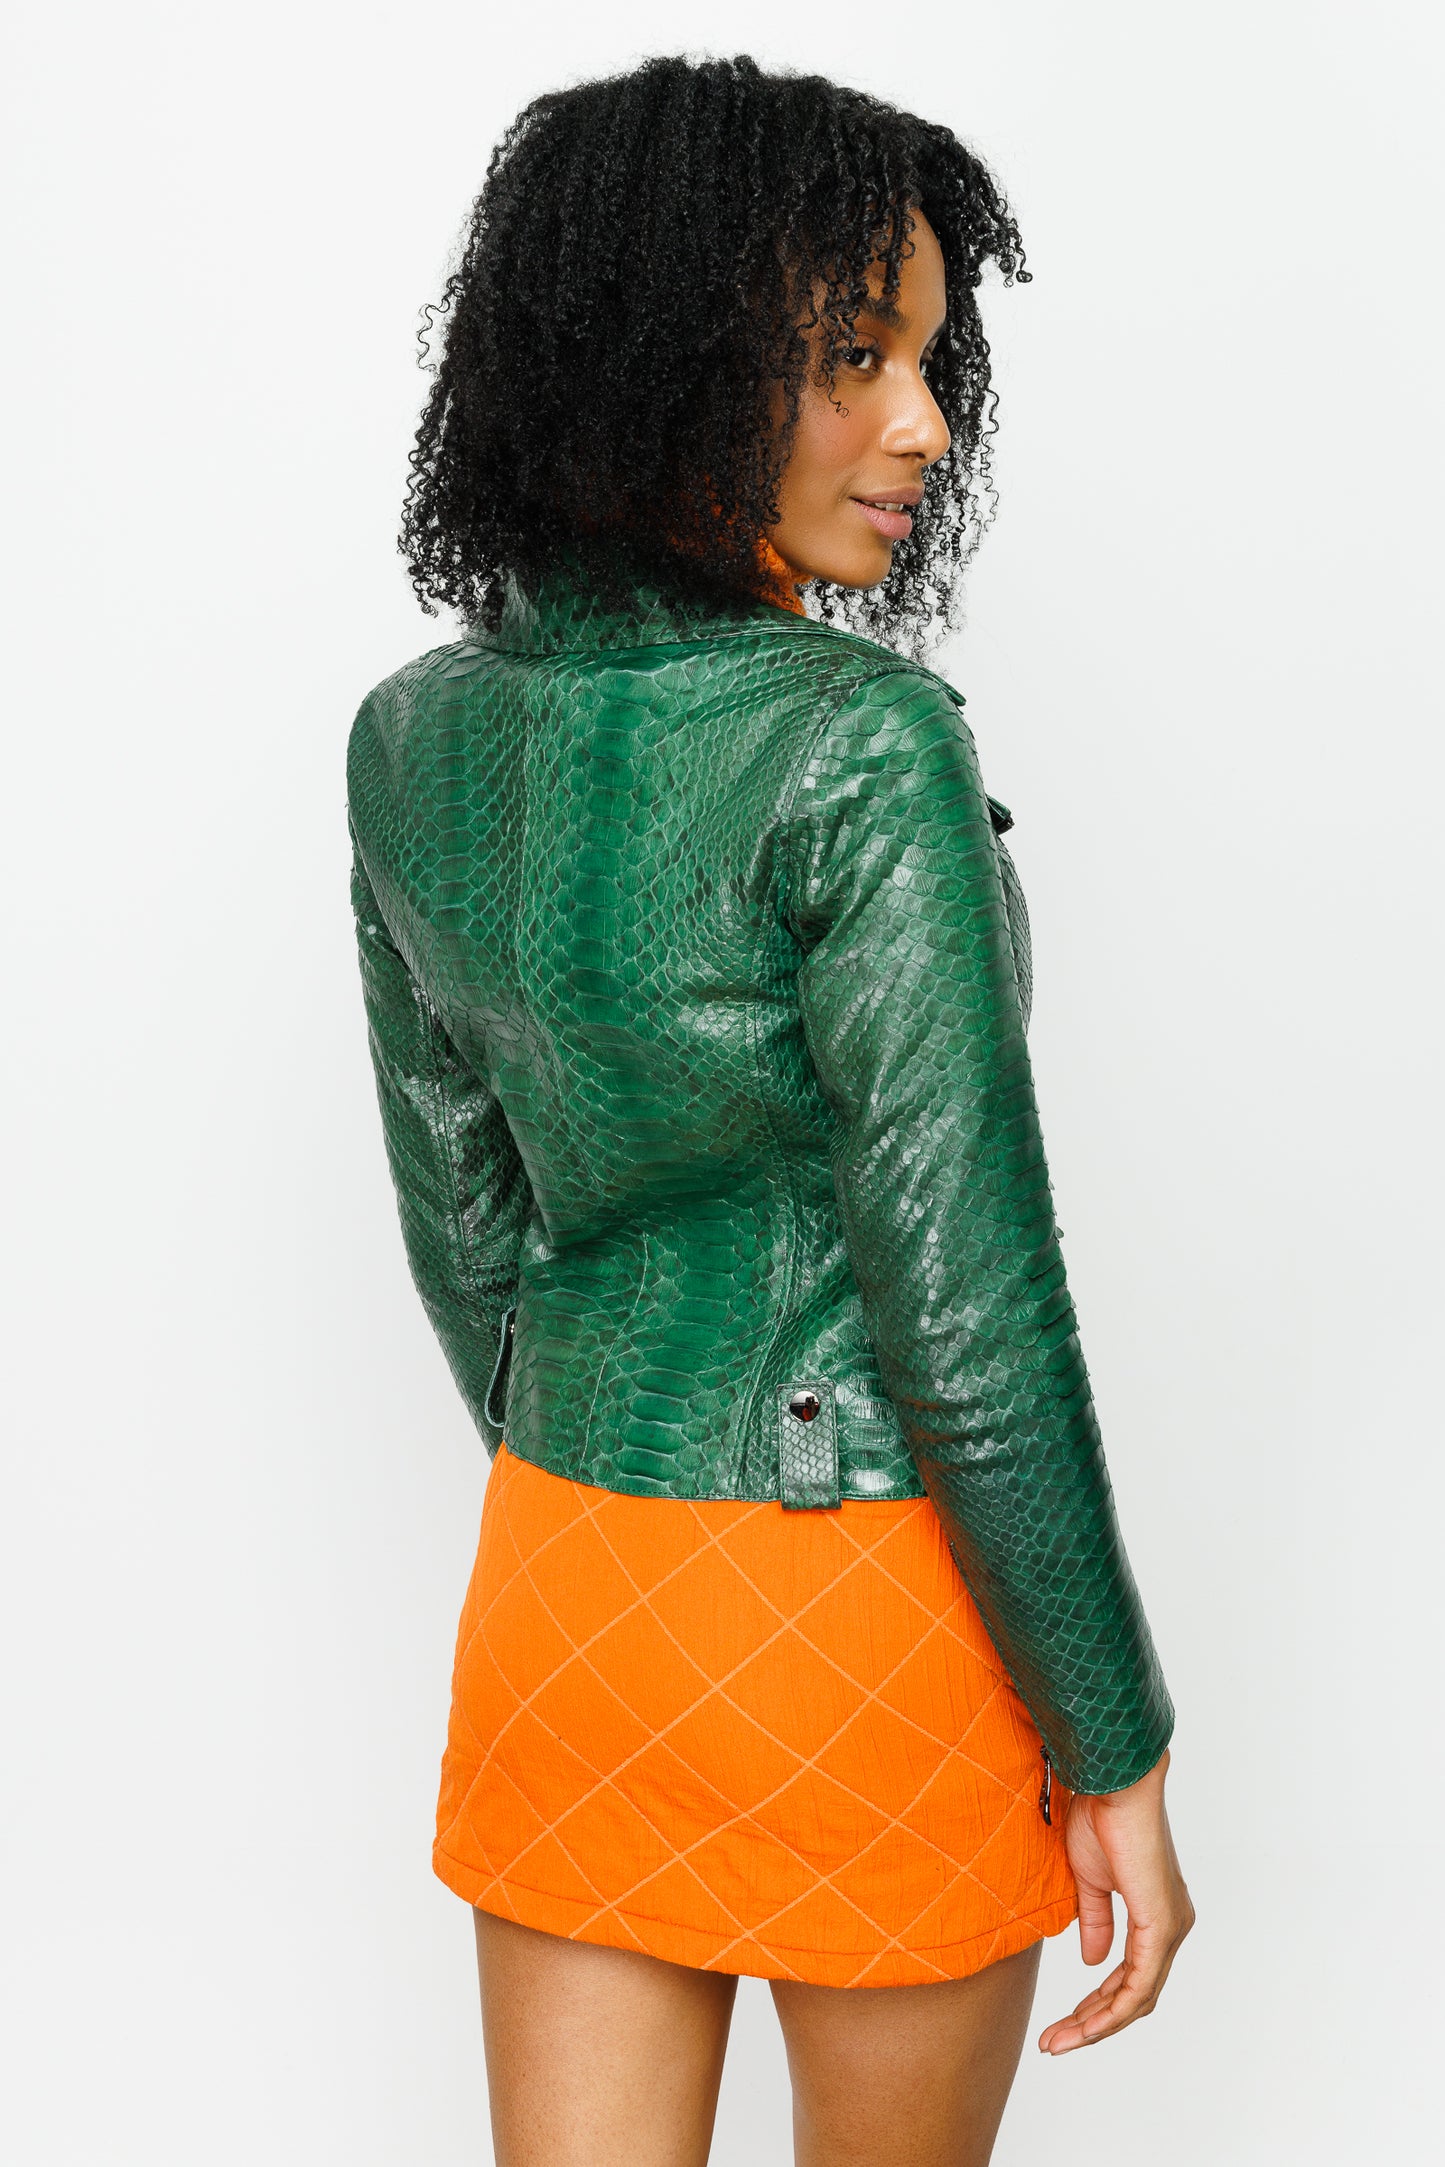 The Pythn Skin Green Leather Jacket